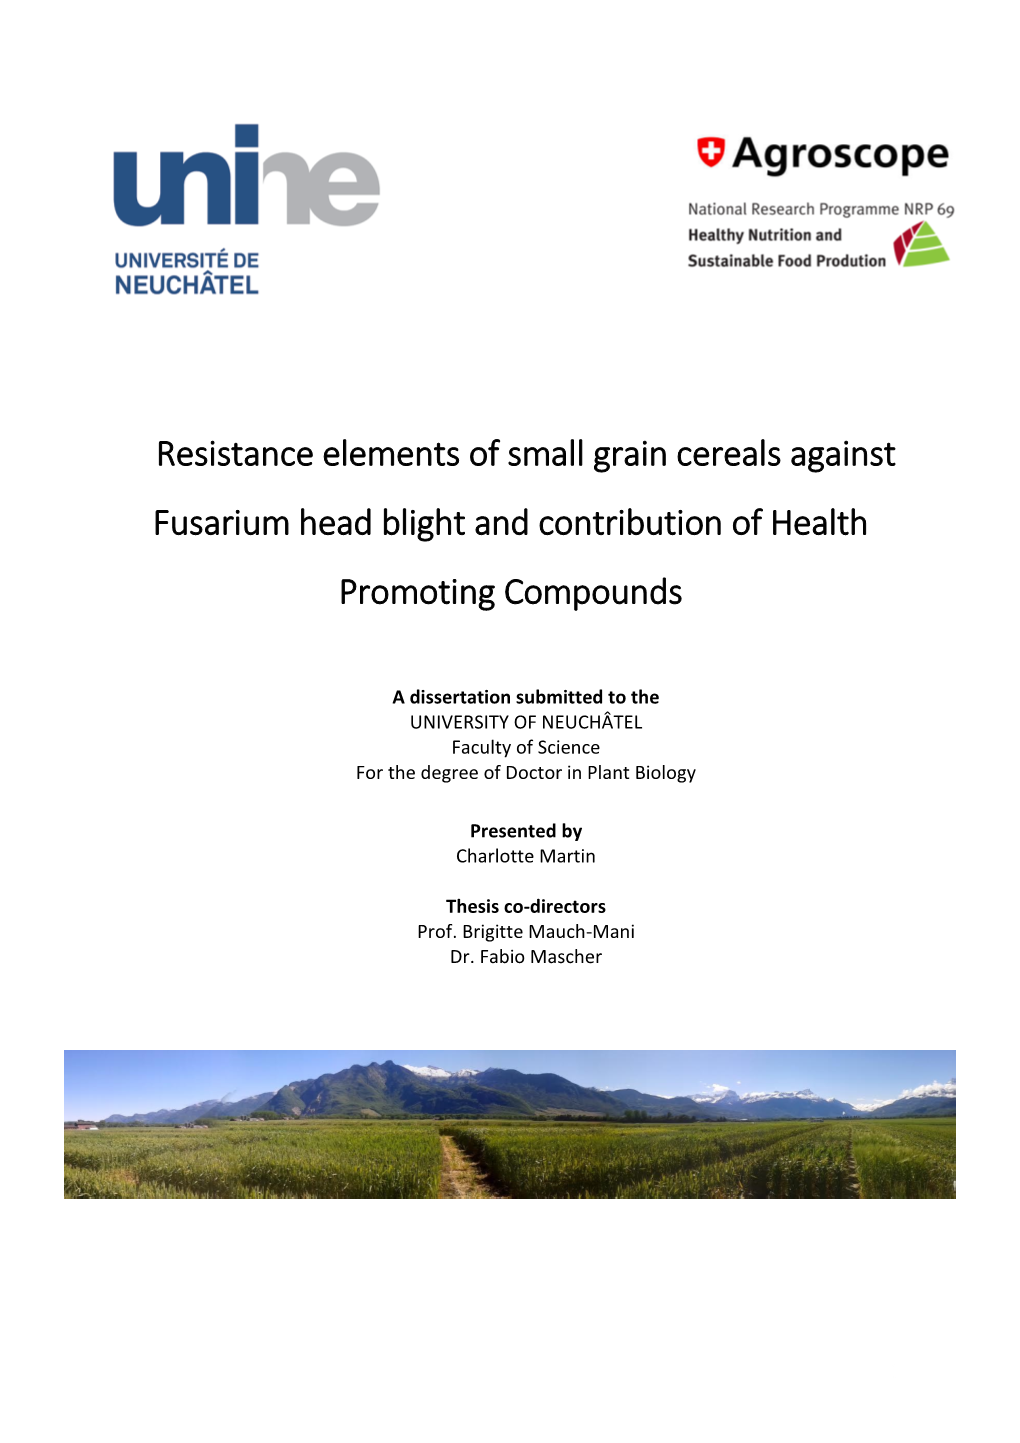 Resistance Elements of Small Grain Cereals Against Fusarium Head Blight and Contribution of Health Promoting Compounds